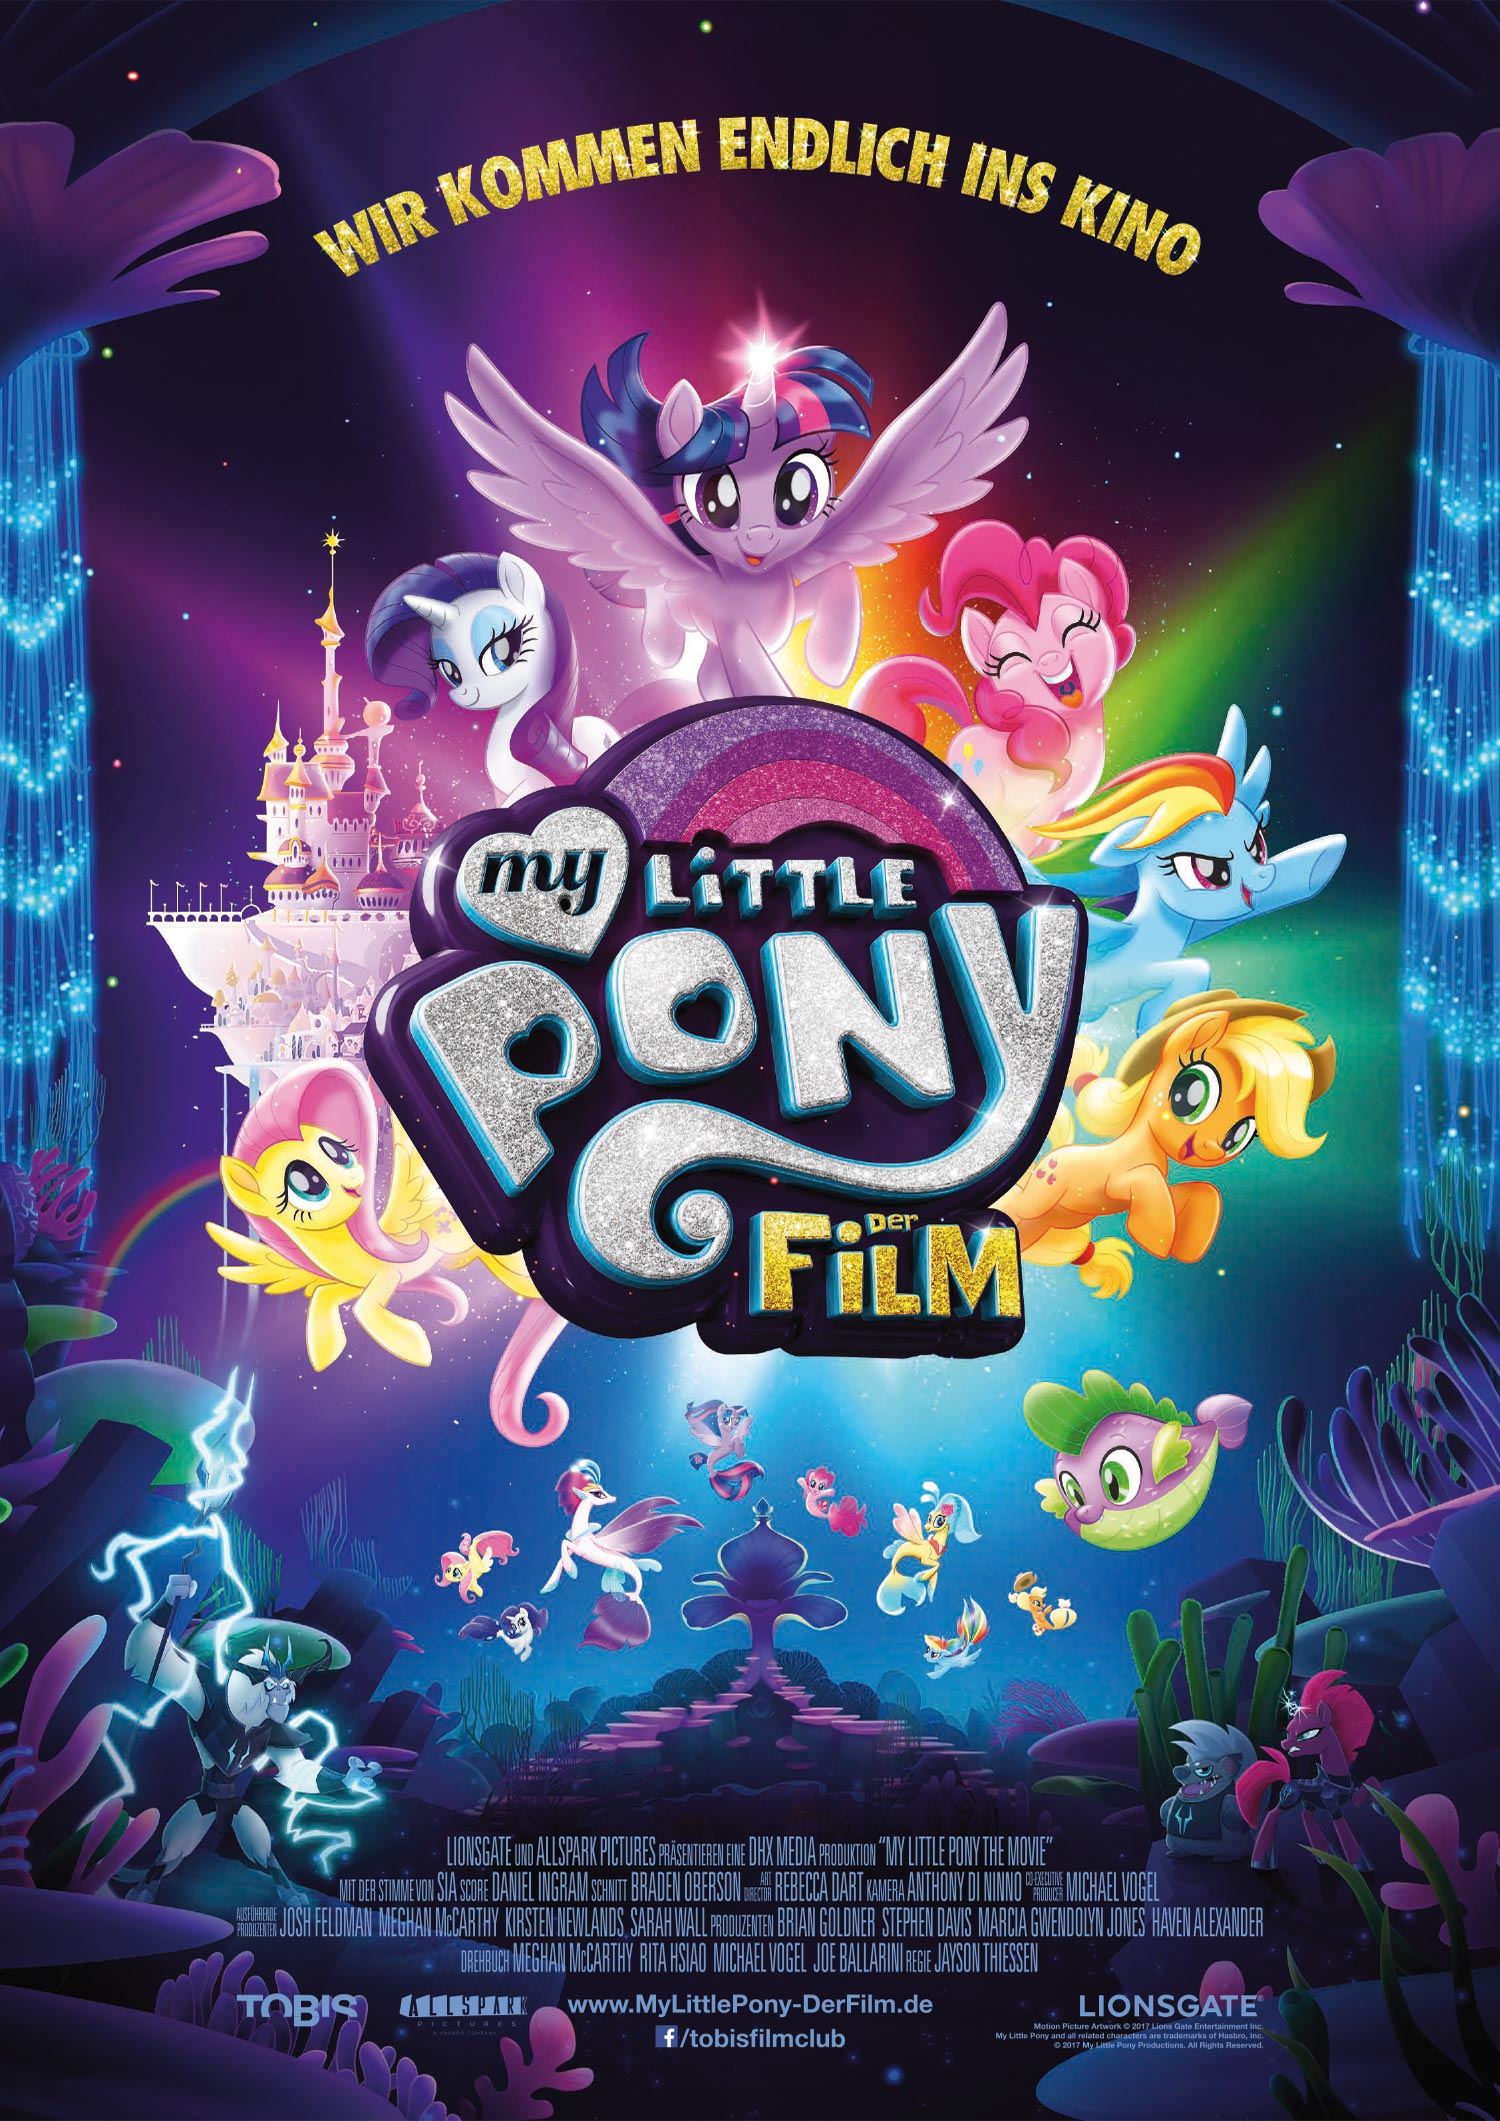 NFP*<a href="/my-little-pony-der-film">→</a><strong>Adaption</strong>